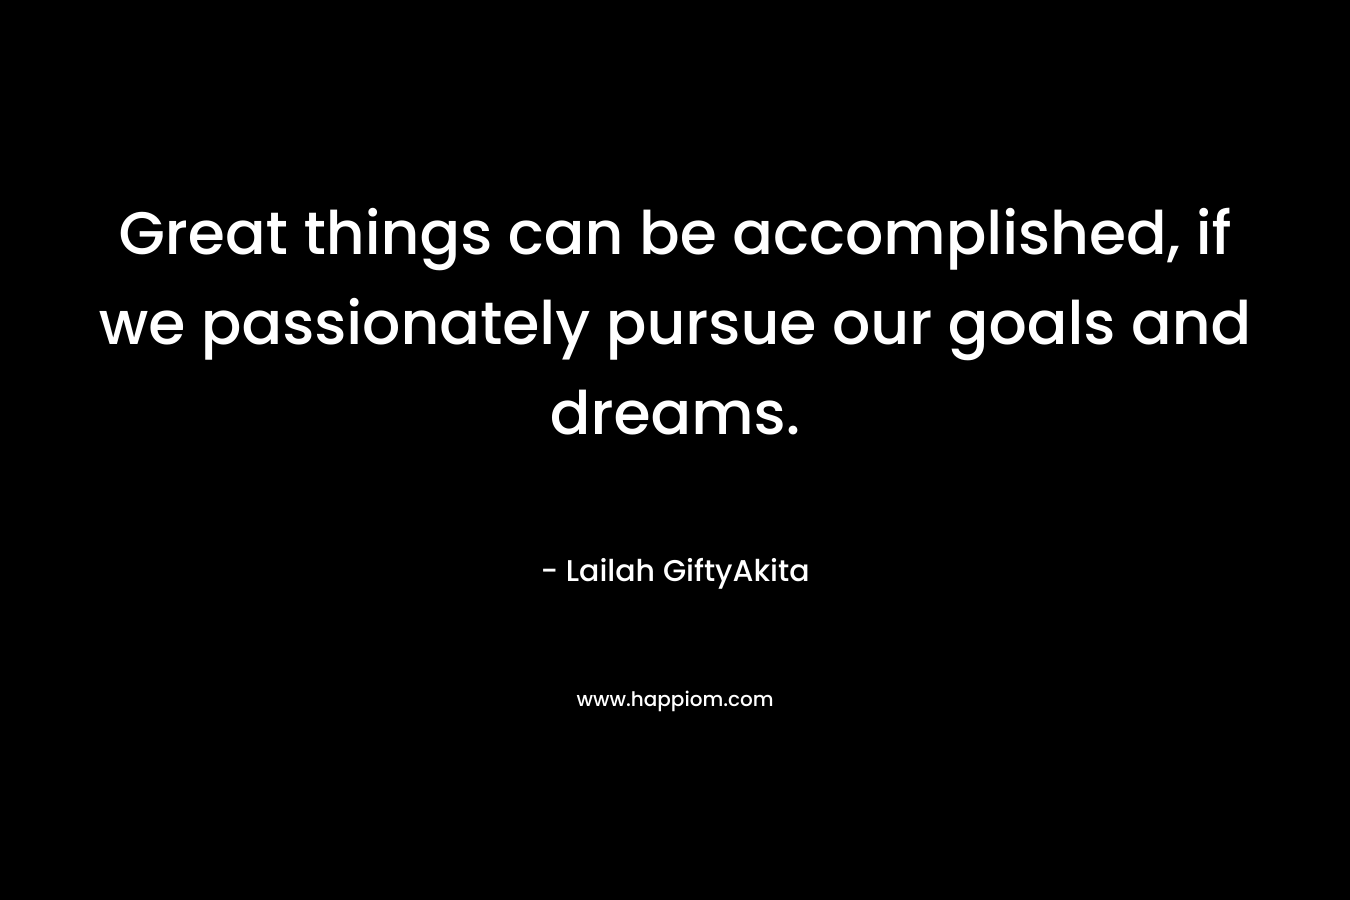 Great things can be accomplished, if we passionately pursue our goals and dreams. – Lailah GiftyAkita